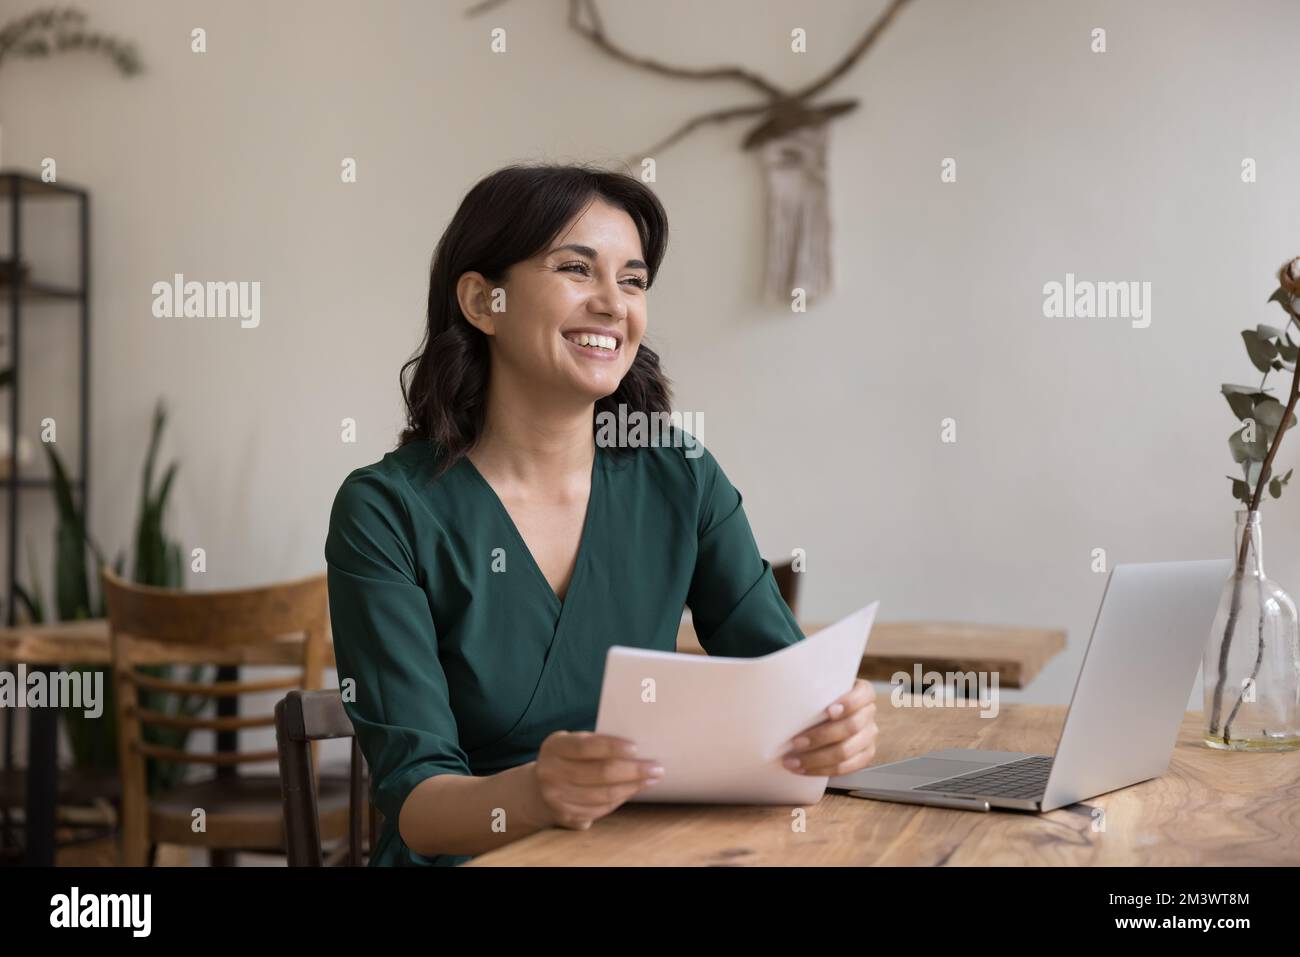 Happy young freelance business woman holding legal documents Stock Photo